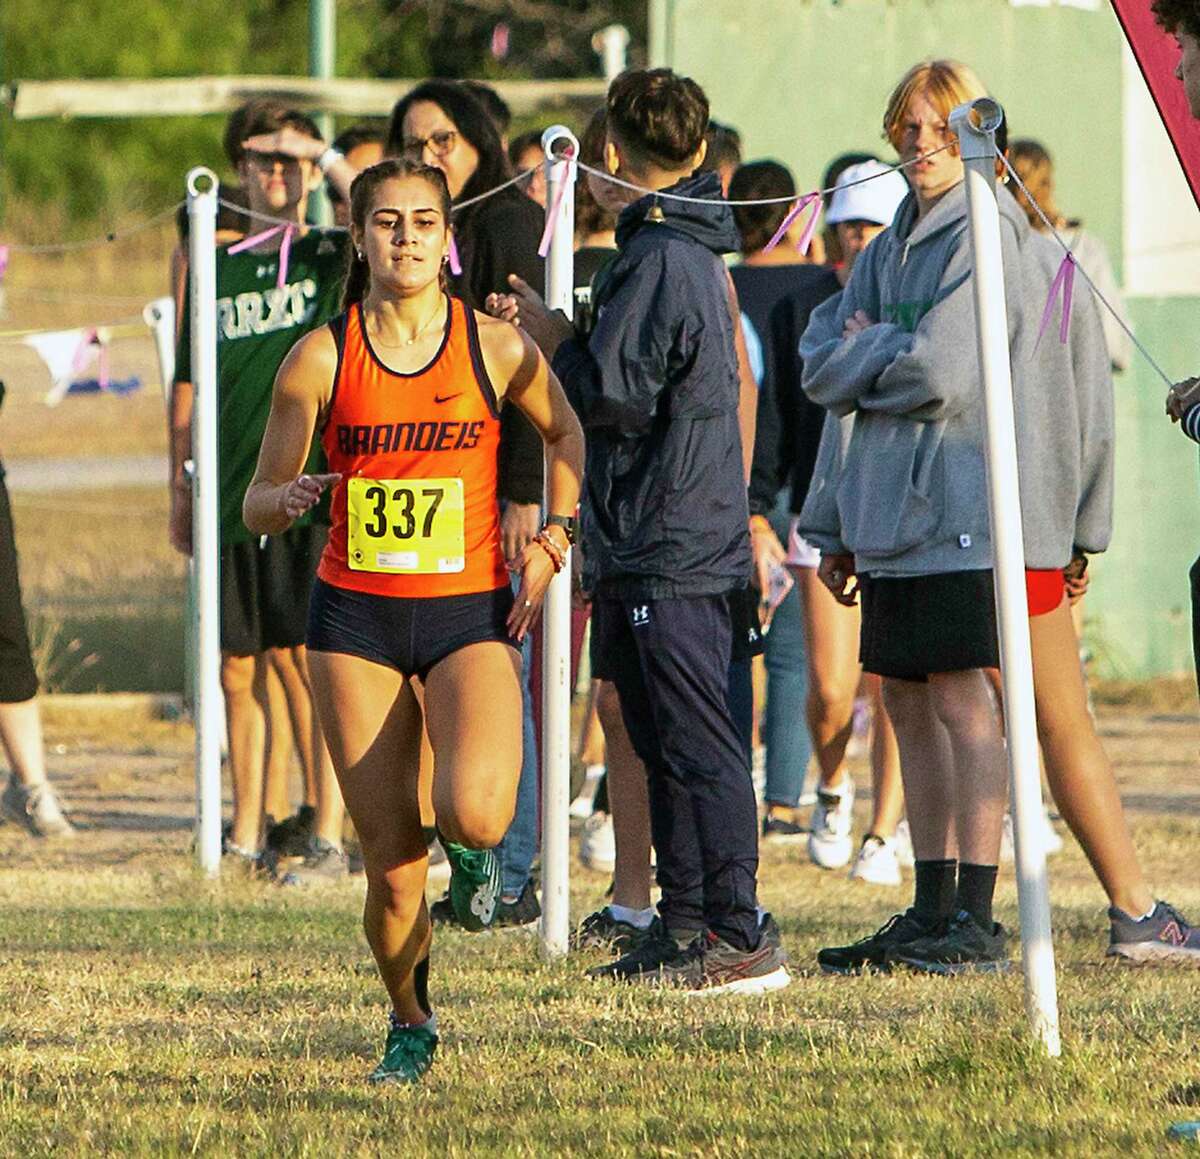 Brandeis’ Mikaela Garza competes Tuesday in the District 28-6A cross country championships at the North East Sports Park. Garza finished first with a time of 18:56.6.